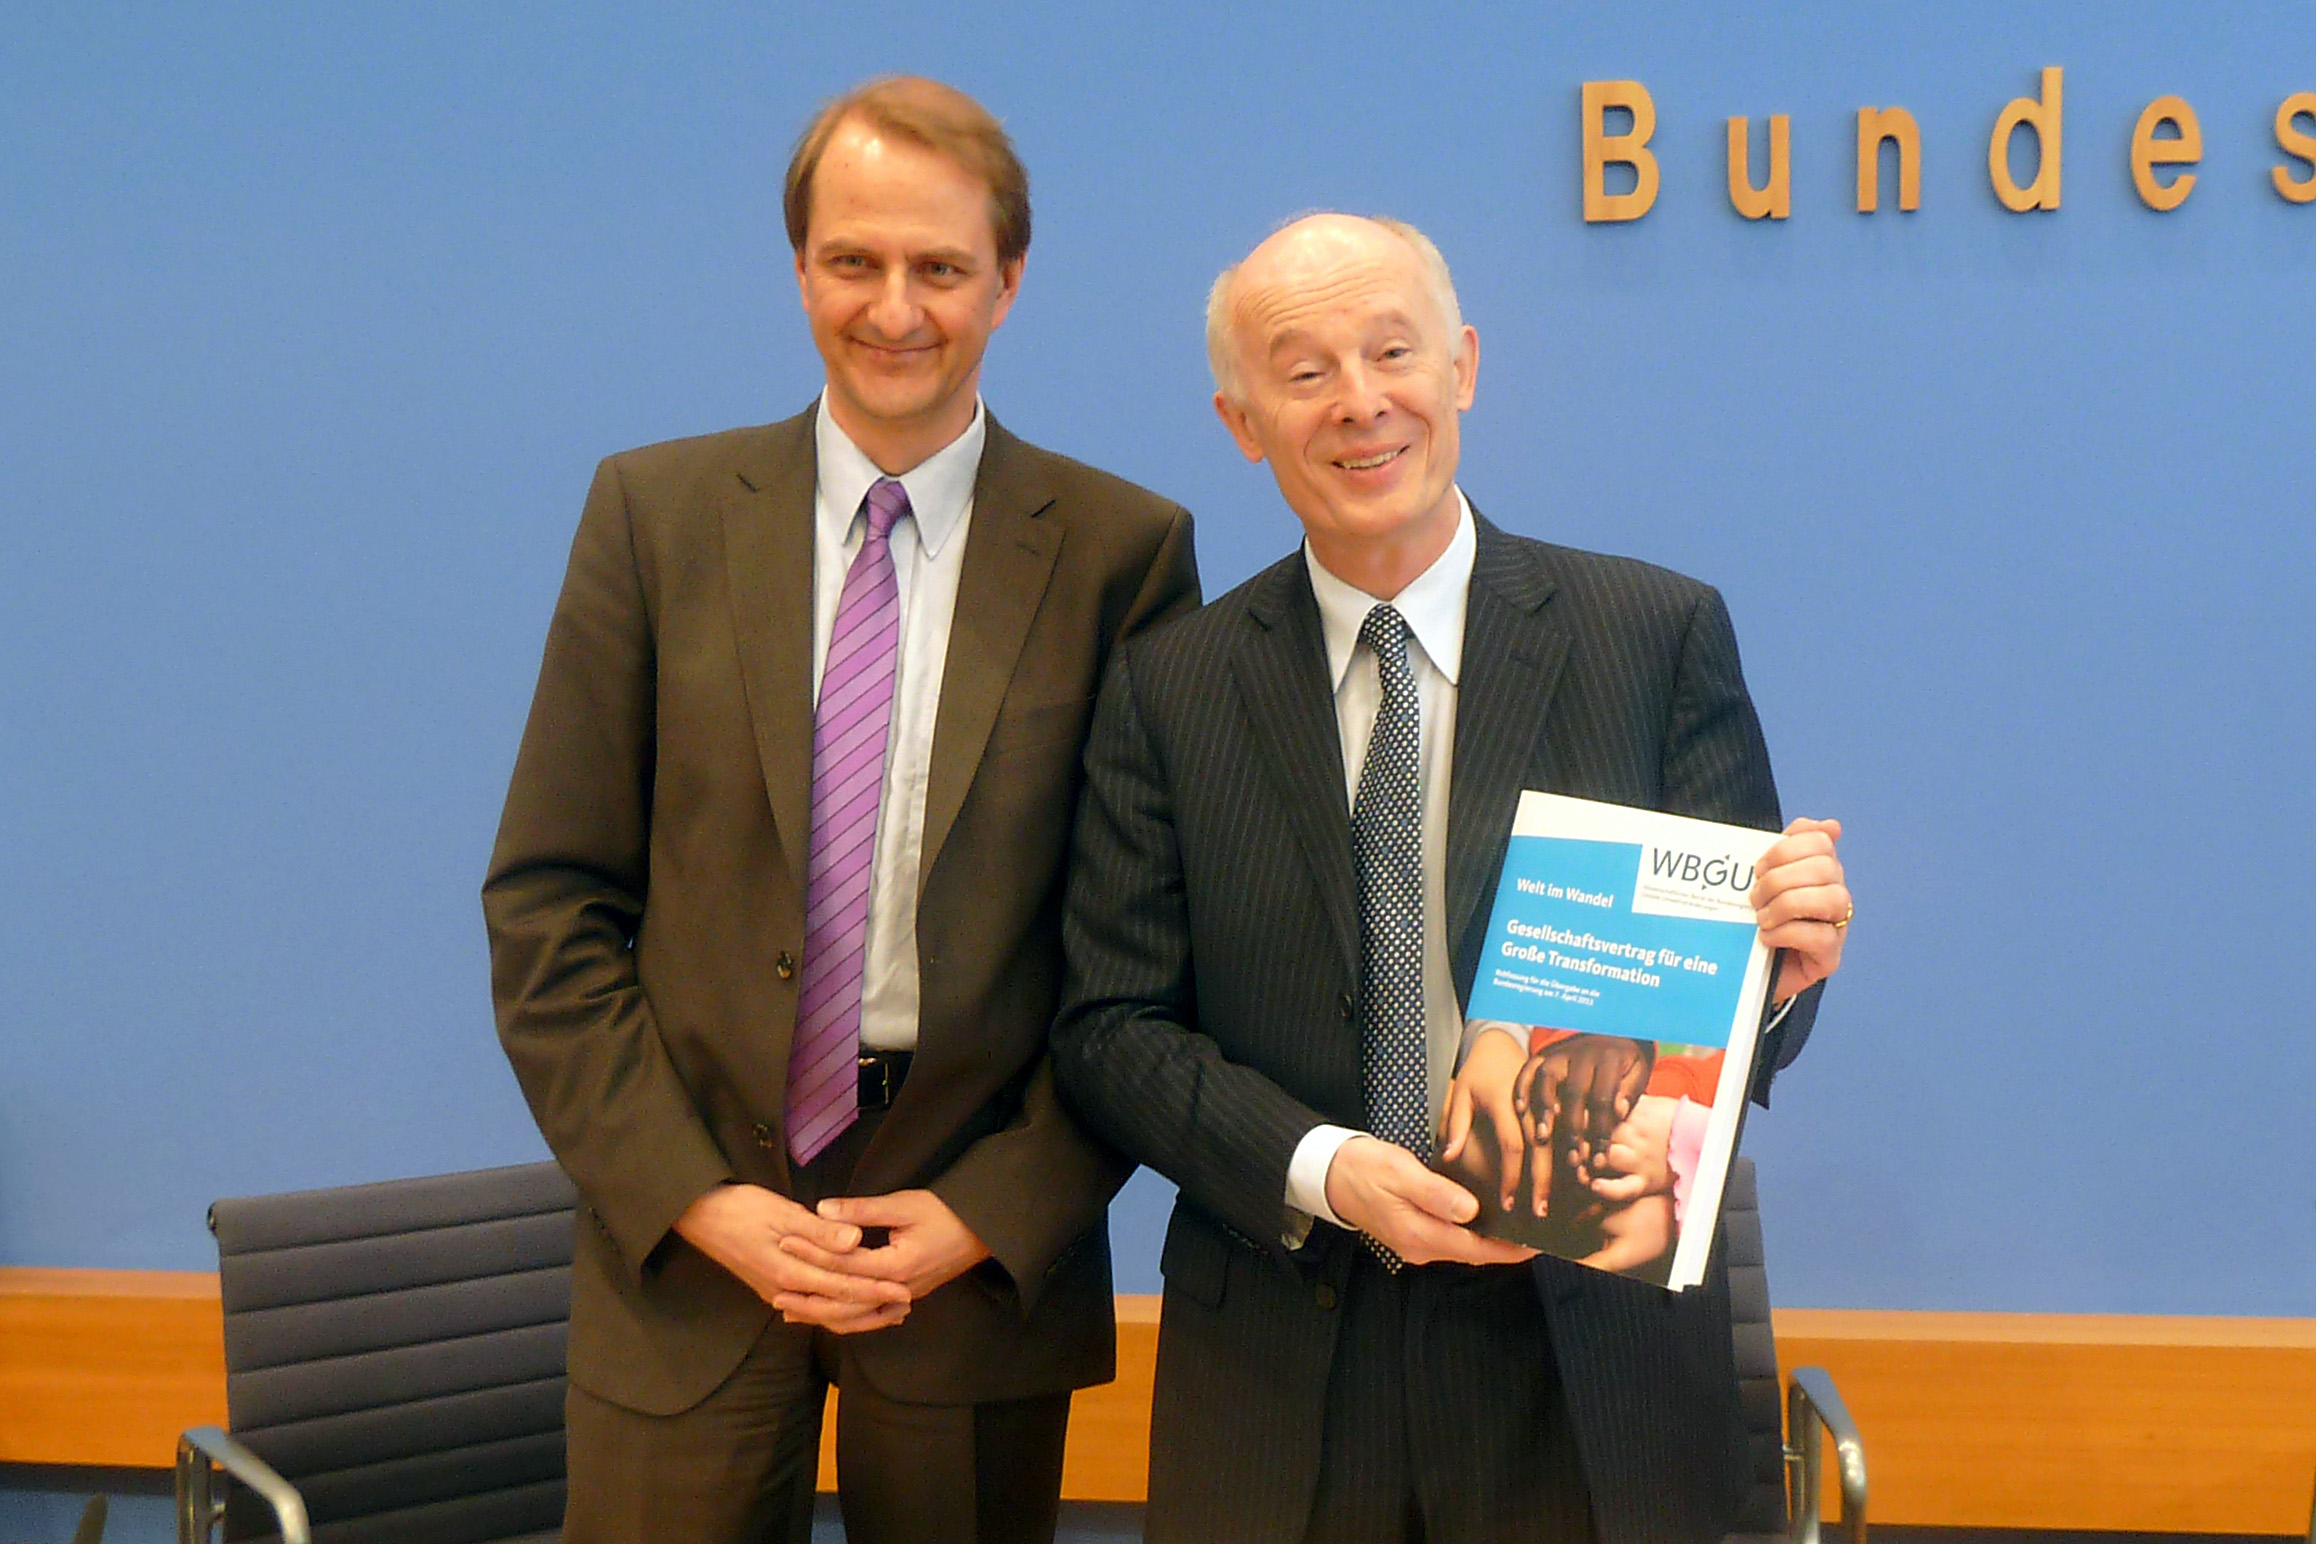 WBGU chair John Schellnhuber and WBGU vice-chair Dirk Messner present the report at the Federal Press Conference in Berlin.